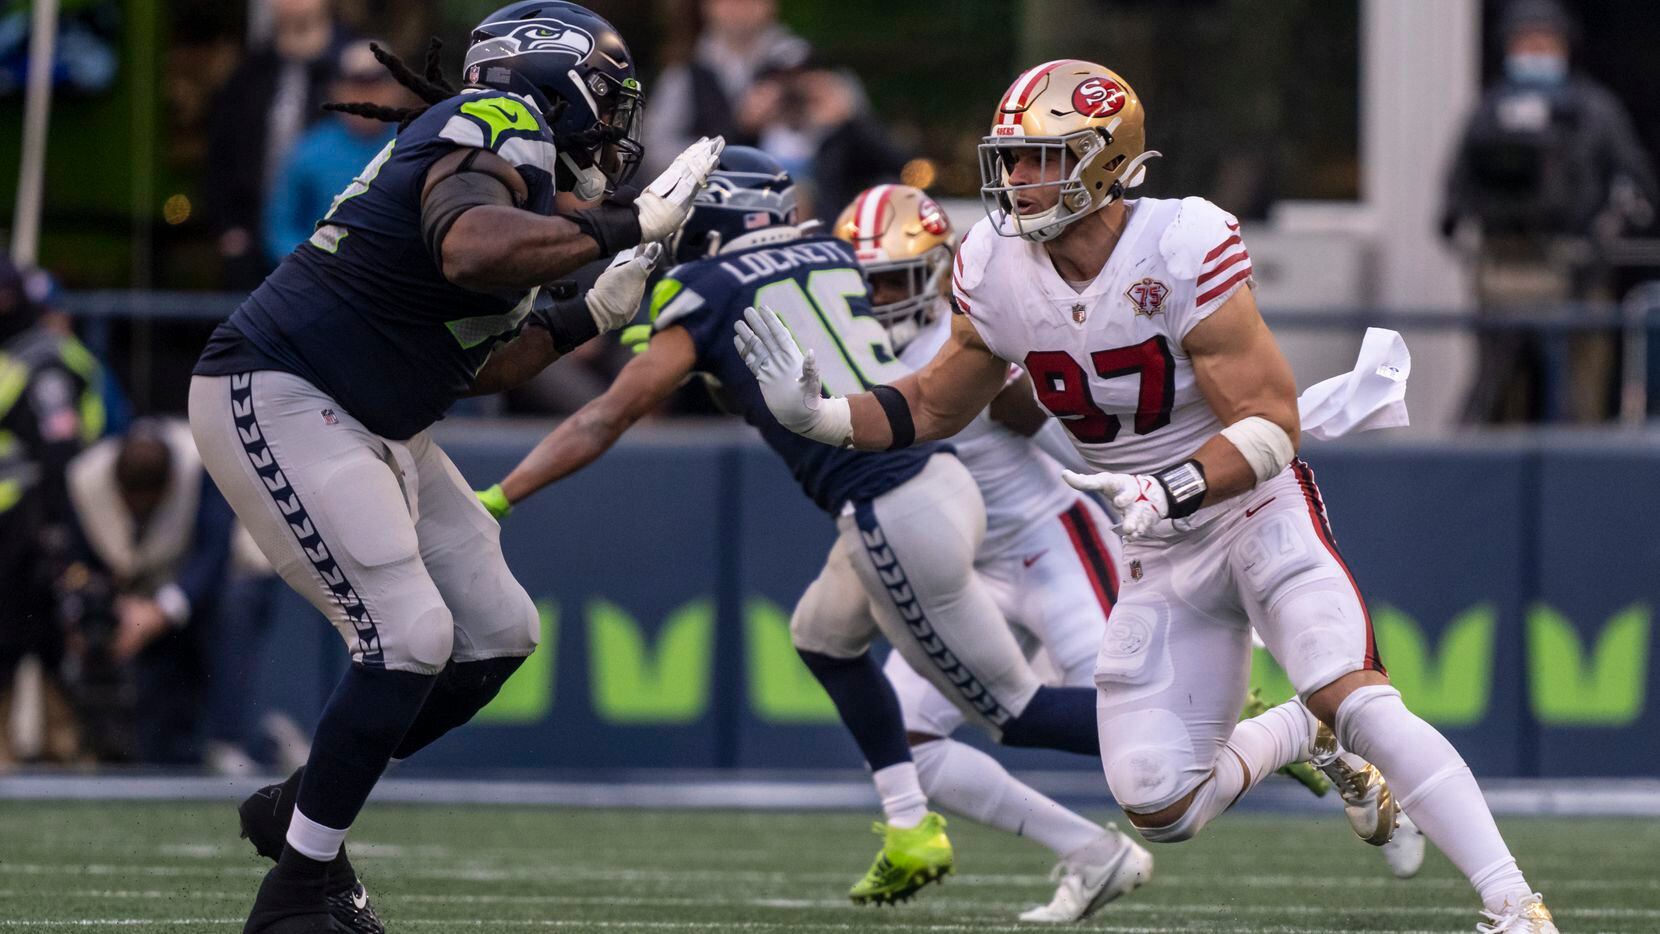 San Francisco 49ers defensive lineman Nick Bosa is pictured during an NFL football game, Sunday, Dec. 5, 2021, in Seattle. The Seahawks won 30-23. (AP Photo/Stephen Brashear)